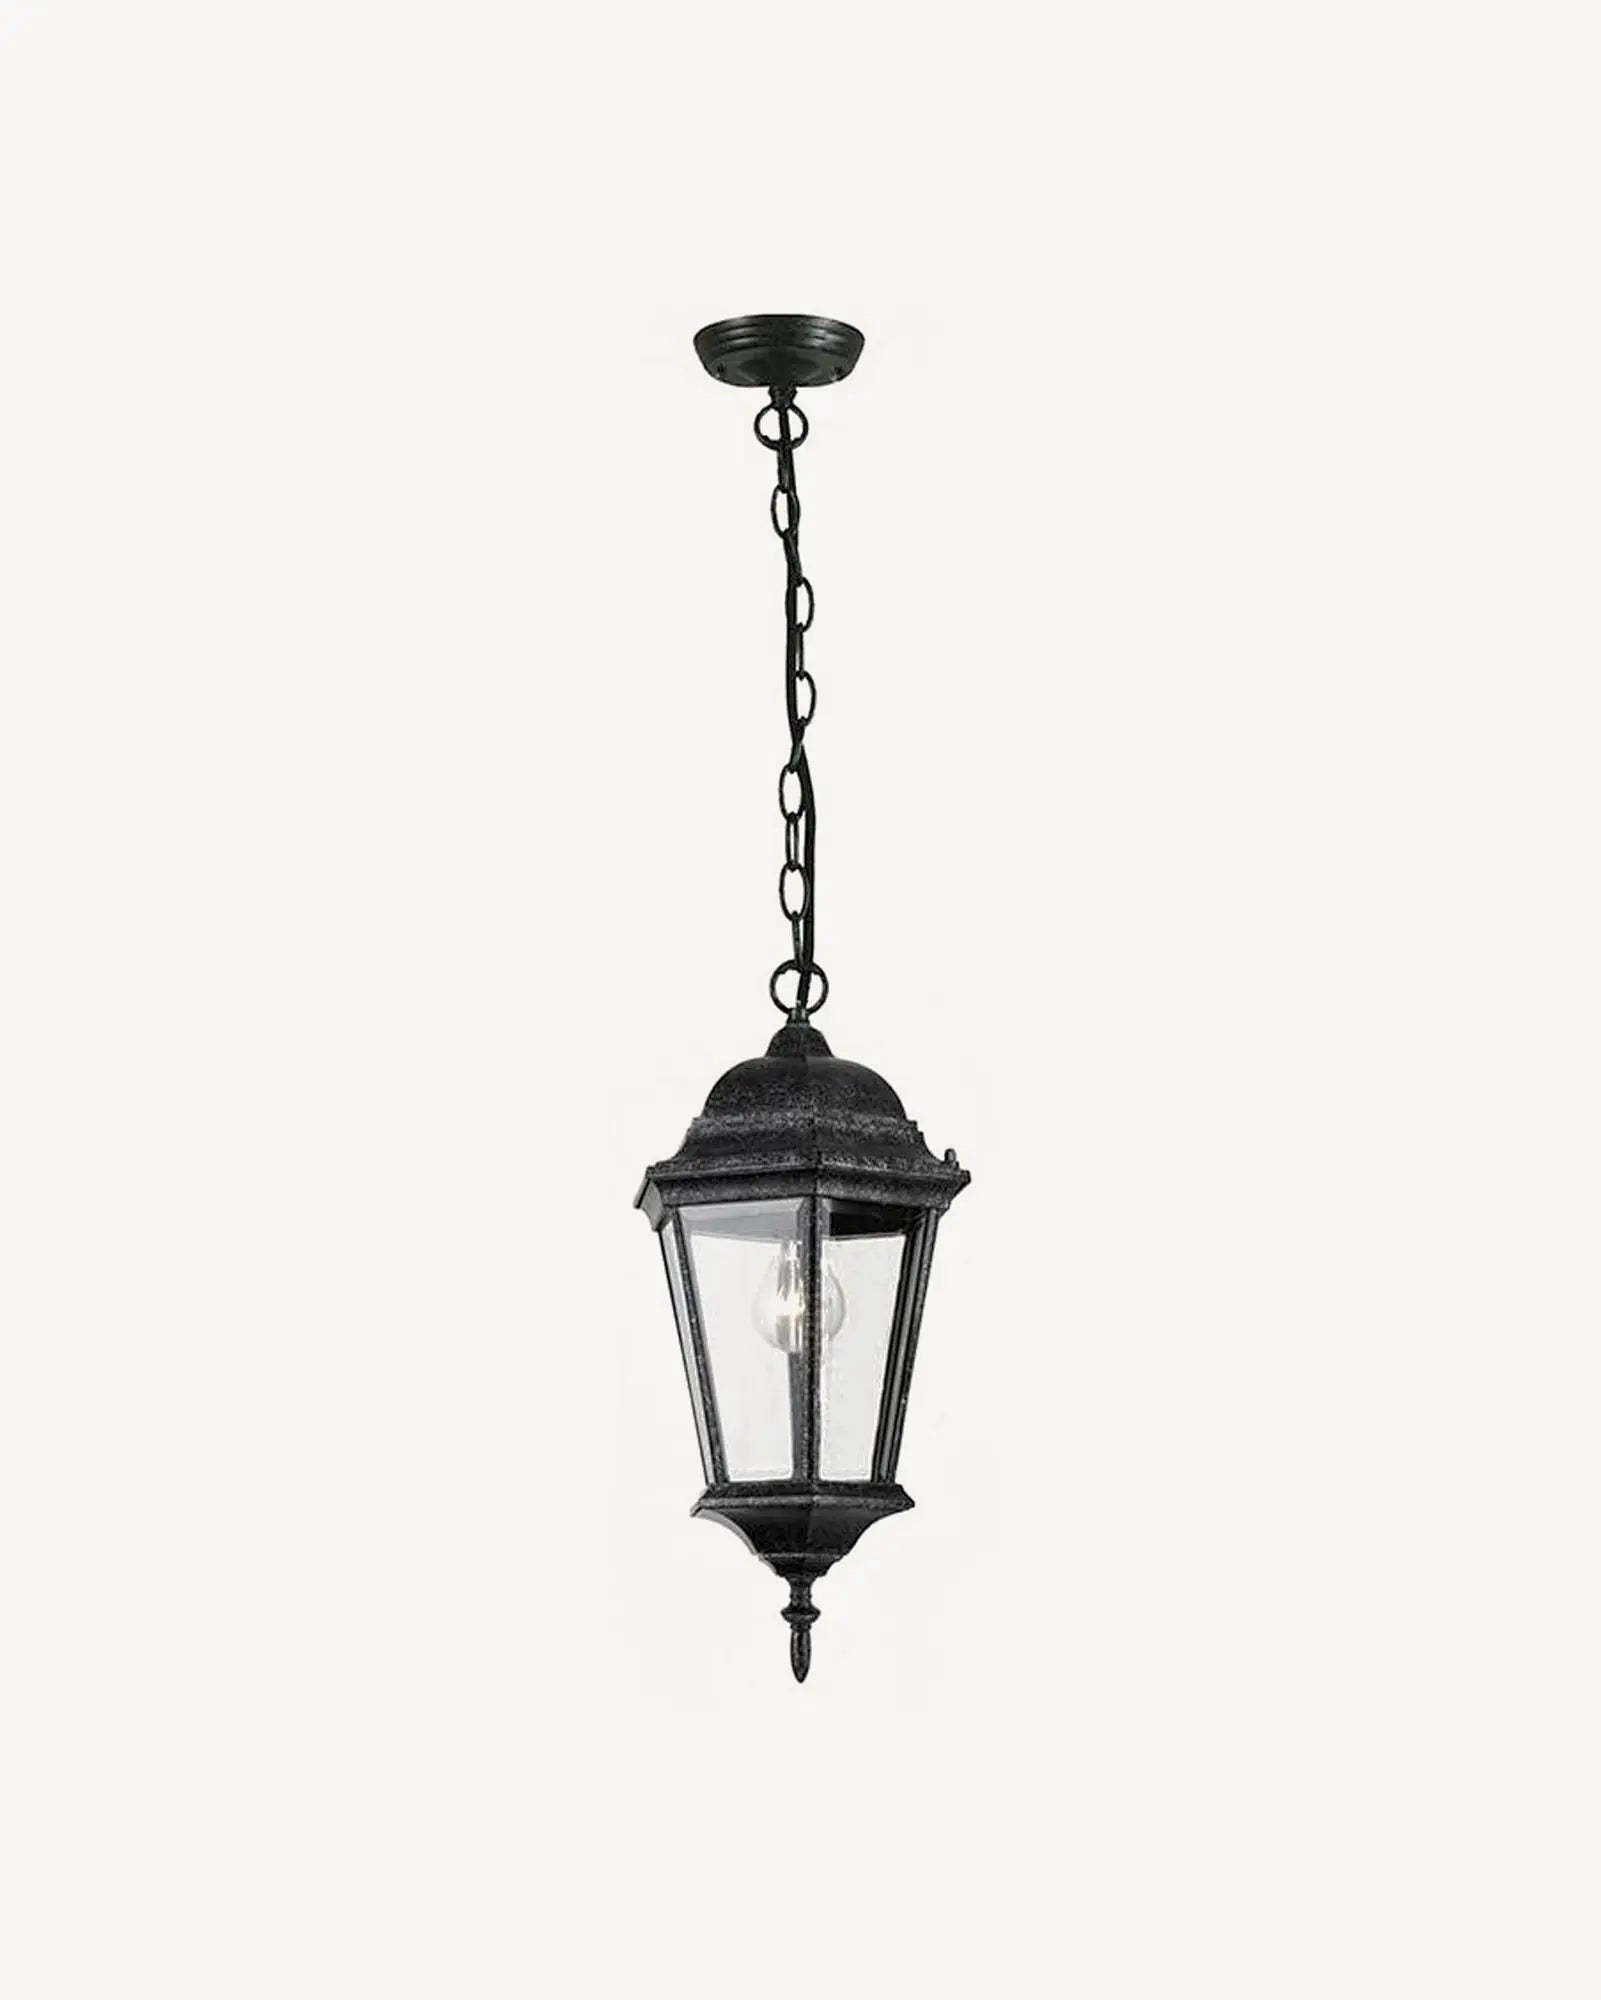 Junction Chain pendant light by Inspiration Light at Nook Collections